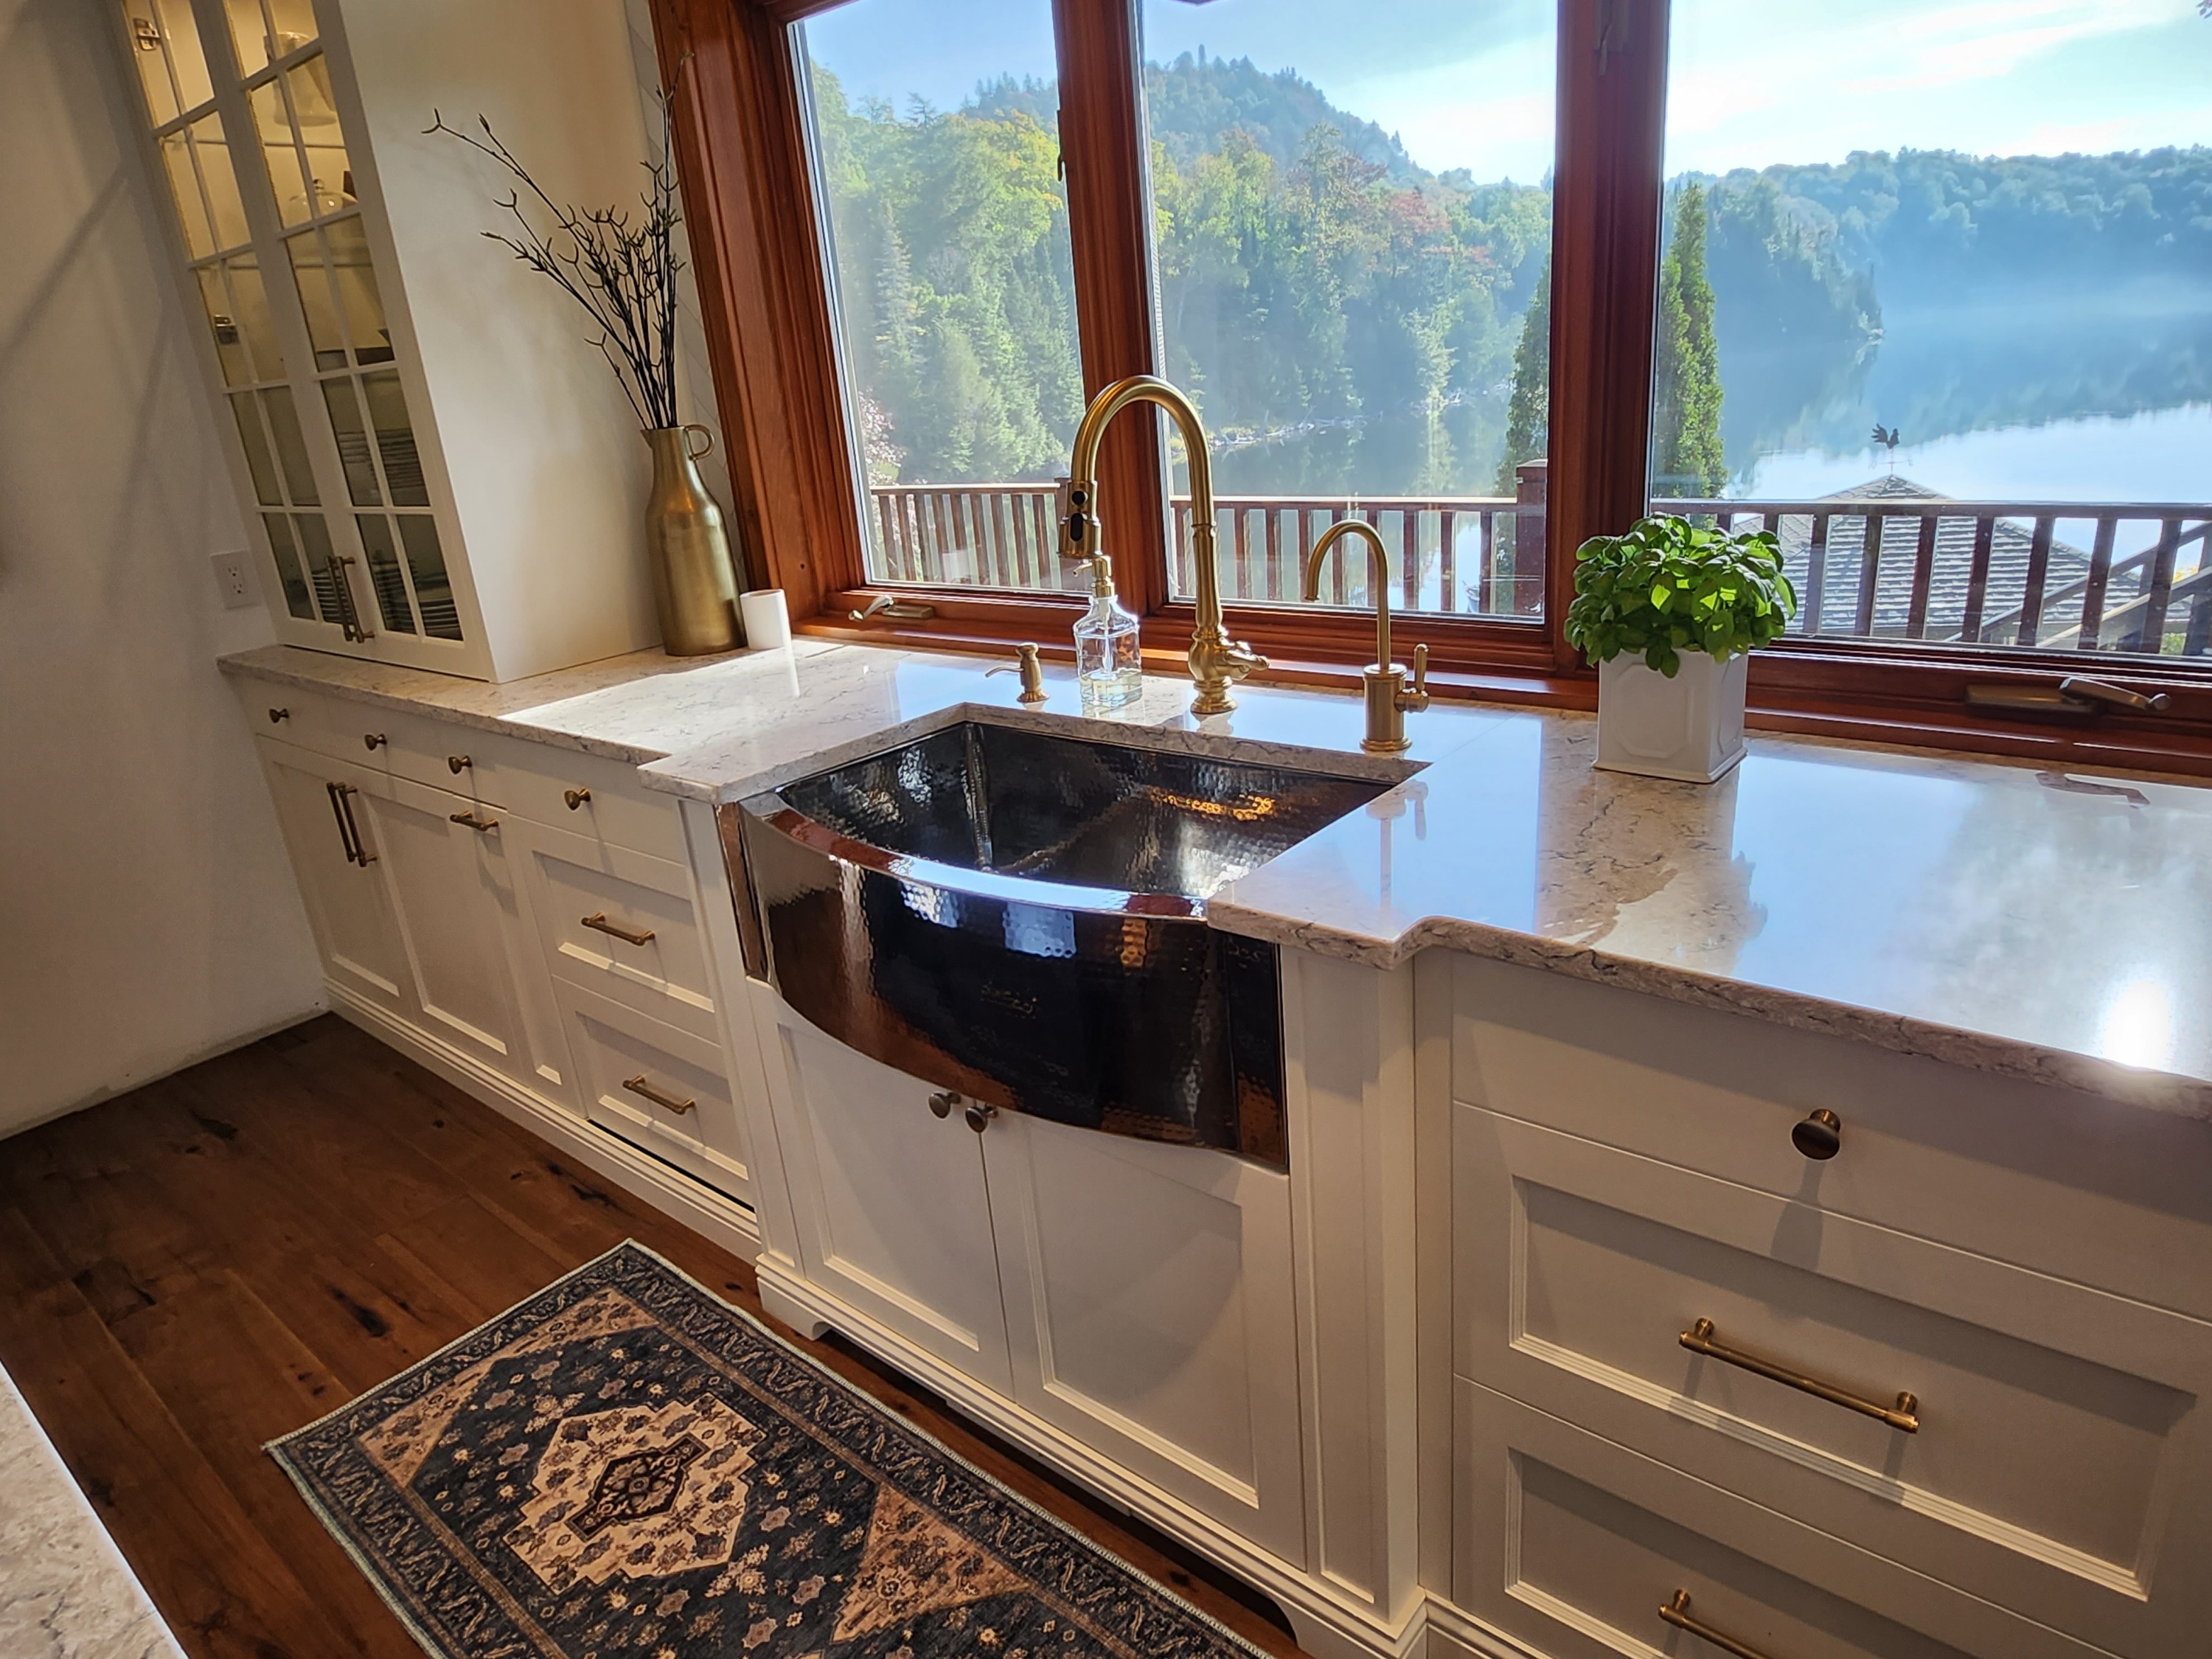 https://worldcoppersmith.com/media/imagegallery/CopperSmith-Semi-Convex-SB-Stainless-Steel-Kitchen-Farmhouse-Sink.jpg